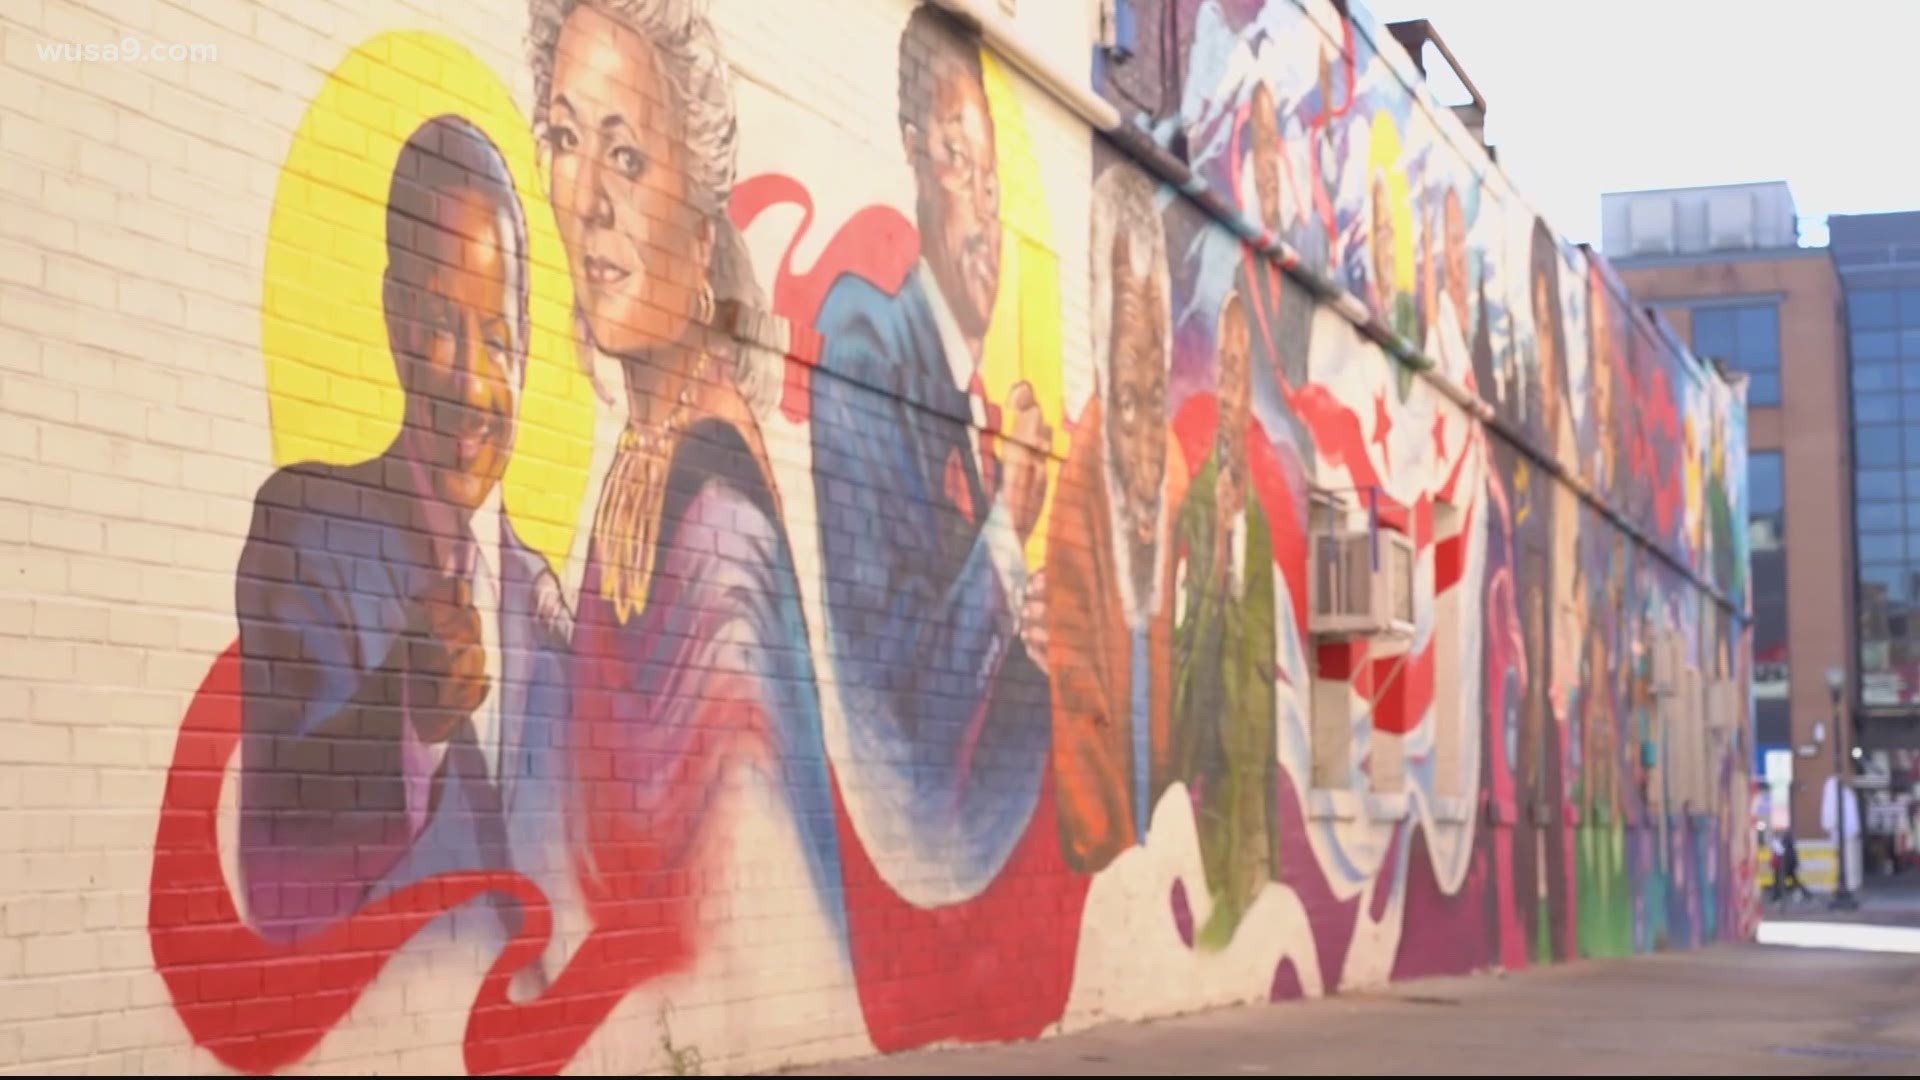 WUSA9's Bruce Johnson is honored with a spot on the mural outside of Ben's Chili Bowl in D.C.